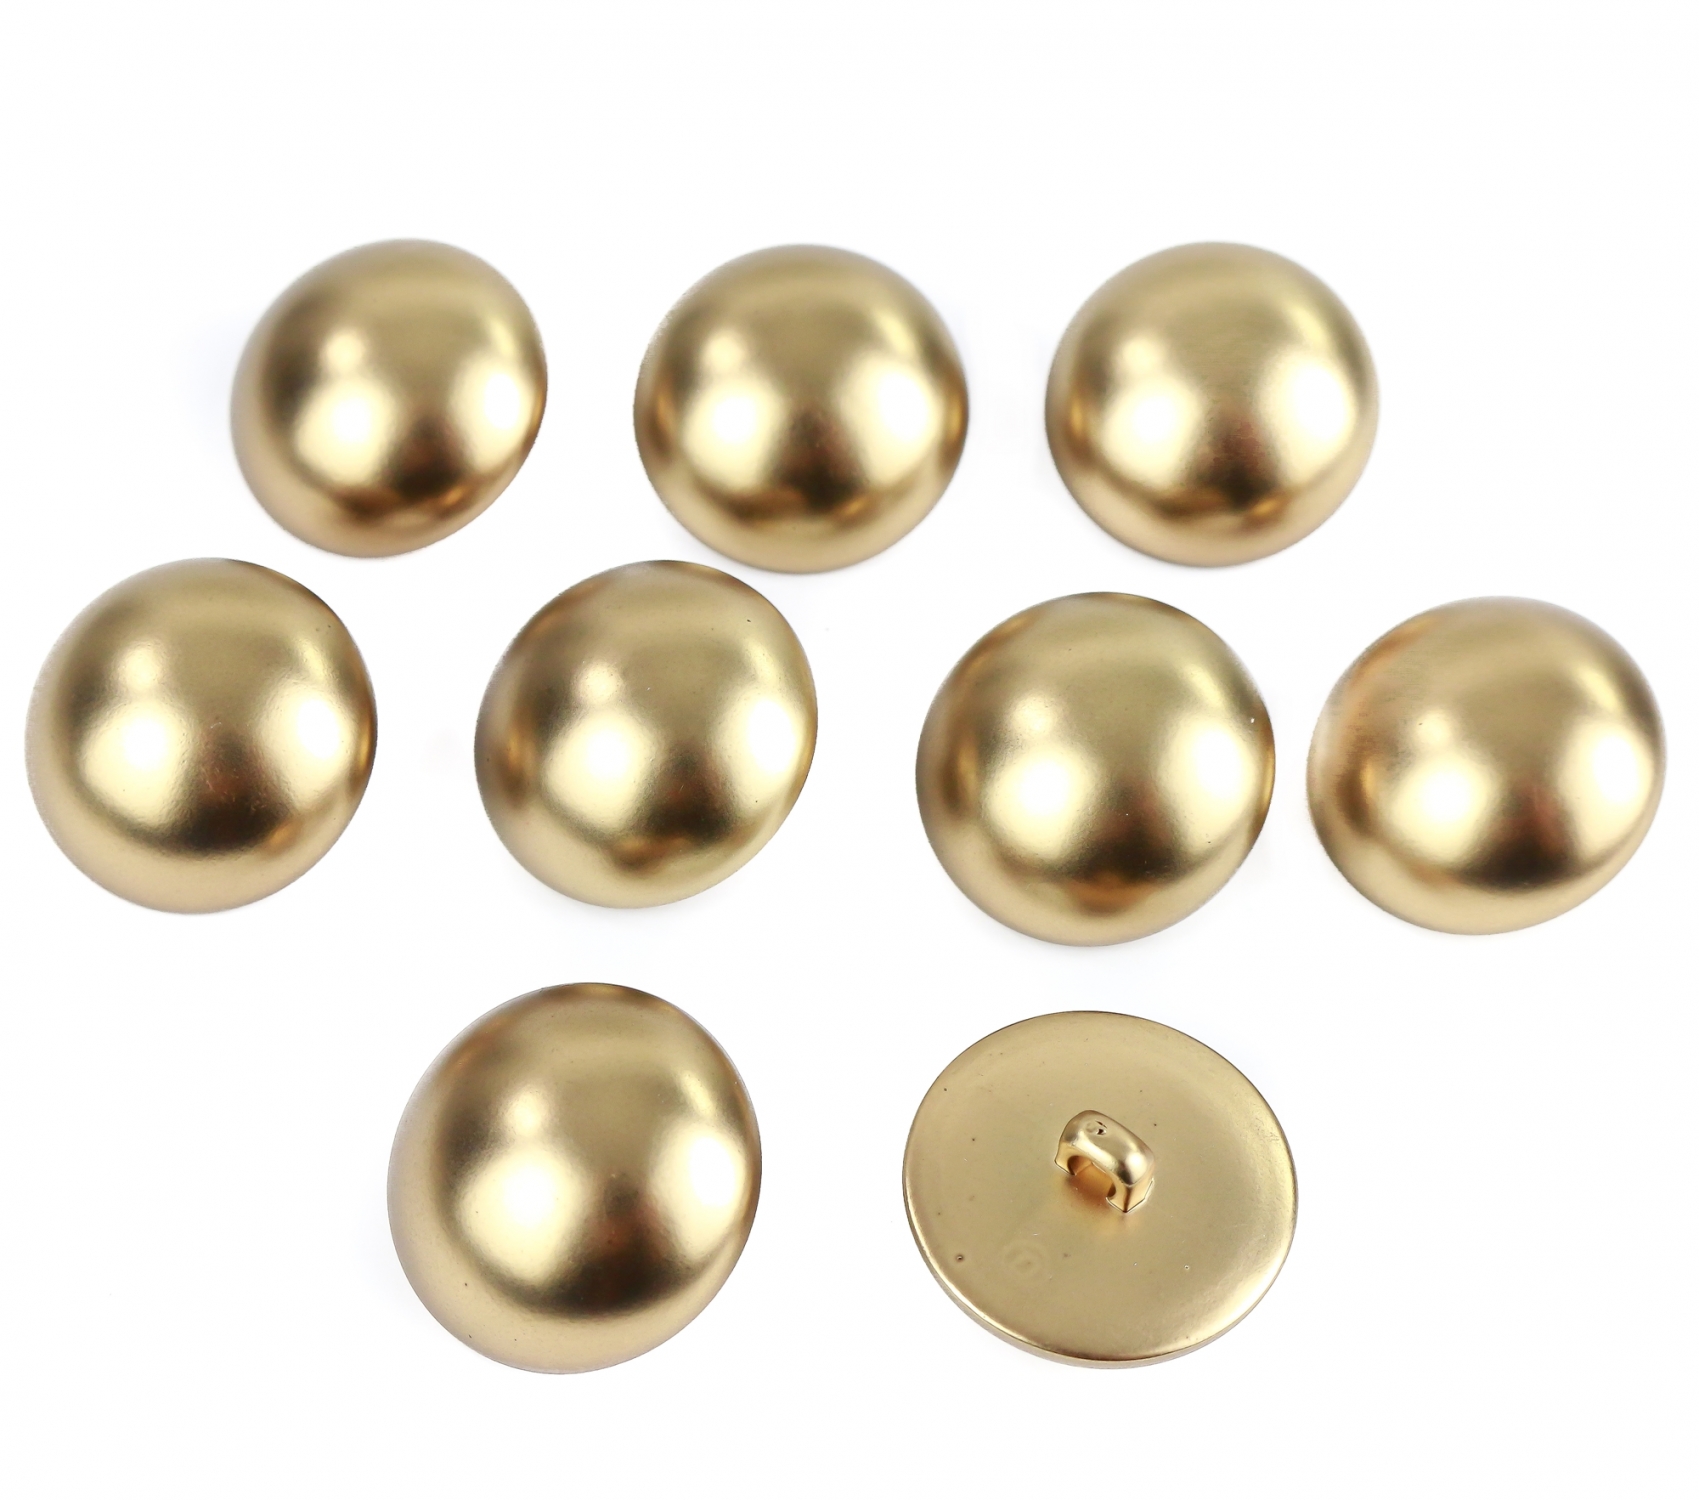 Plastic Metallized Shank Buttons, size 44 (100 pcs/pack) Code: S1